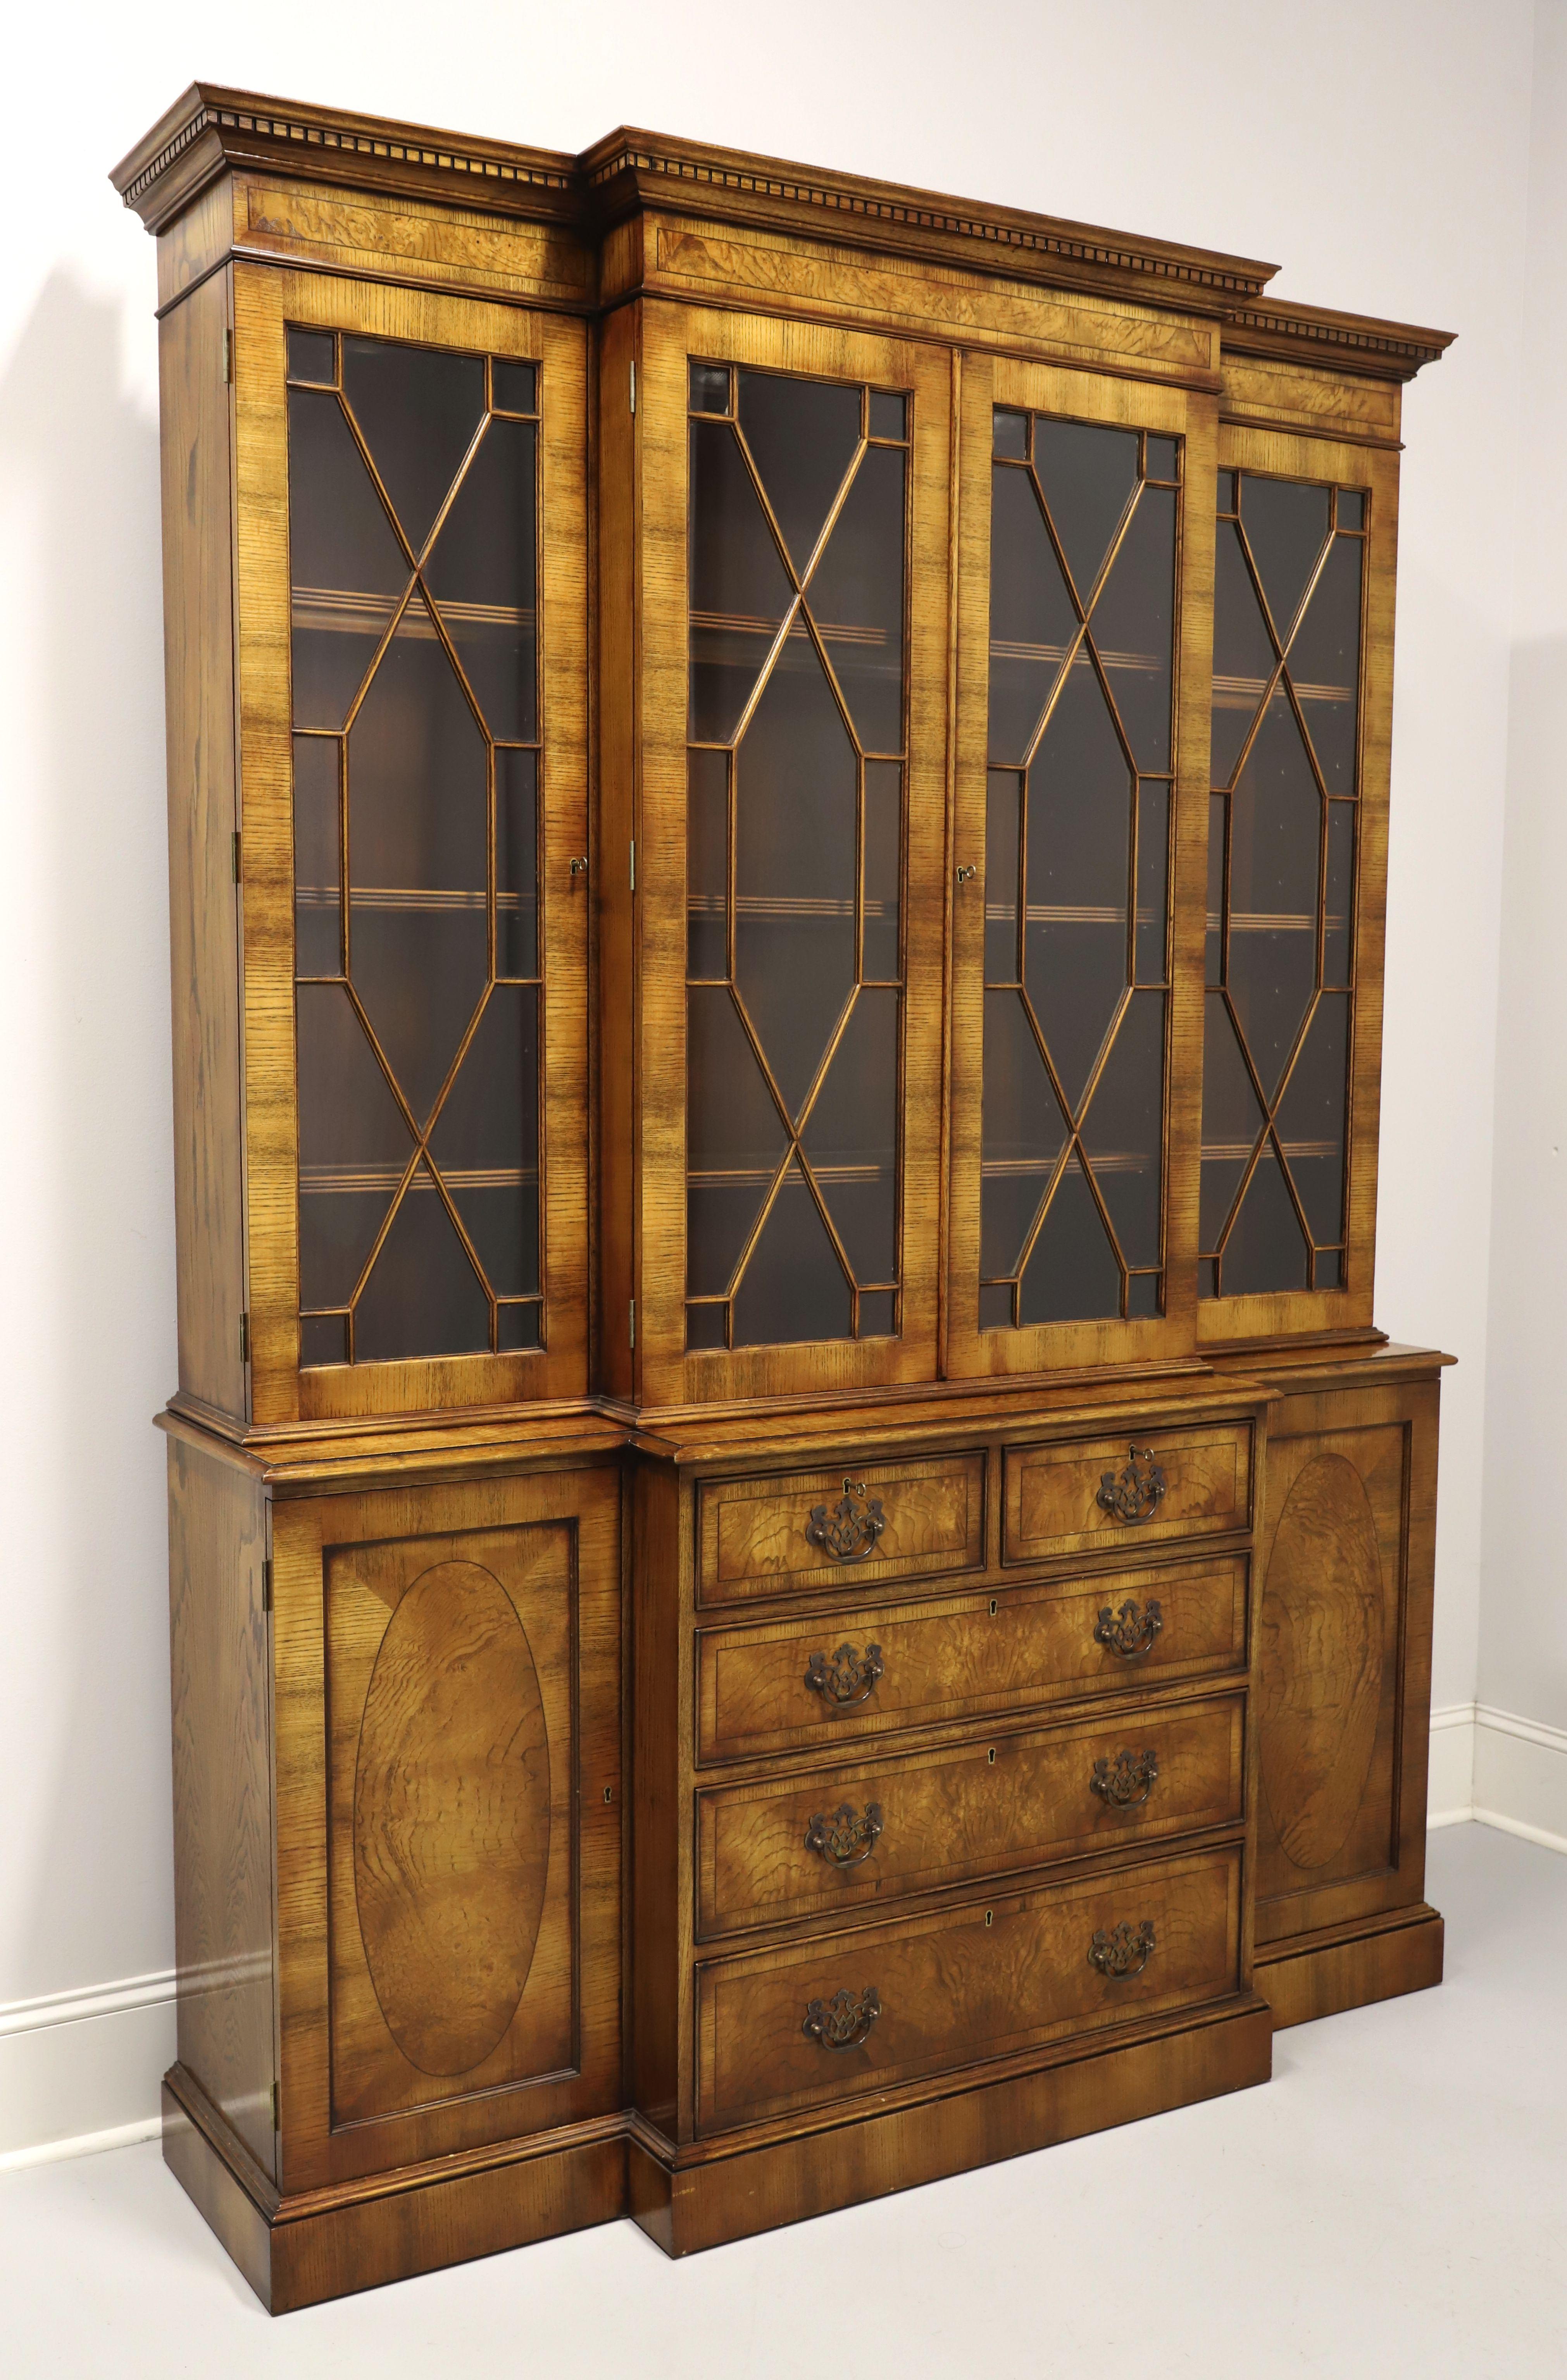 A Chippendale style breakfront china cabinet by Trosby Furniture. Burlwood & oak with a slightly distressed finish, brass hardware, crown & dentil moulding to top, paned fretwork glass doors, banded door & drawer fronts, bevel edge to top of lower